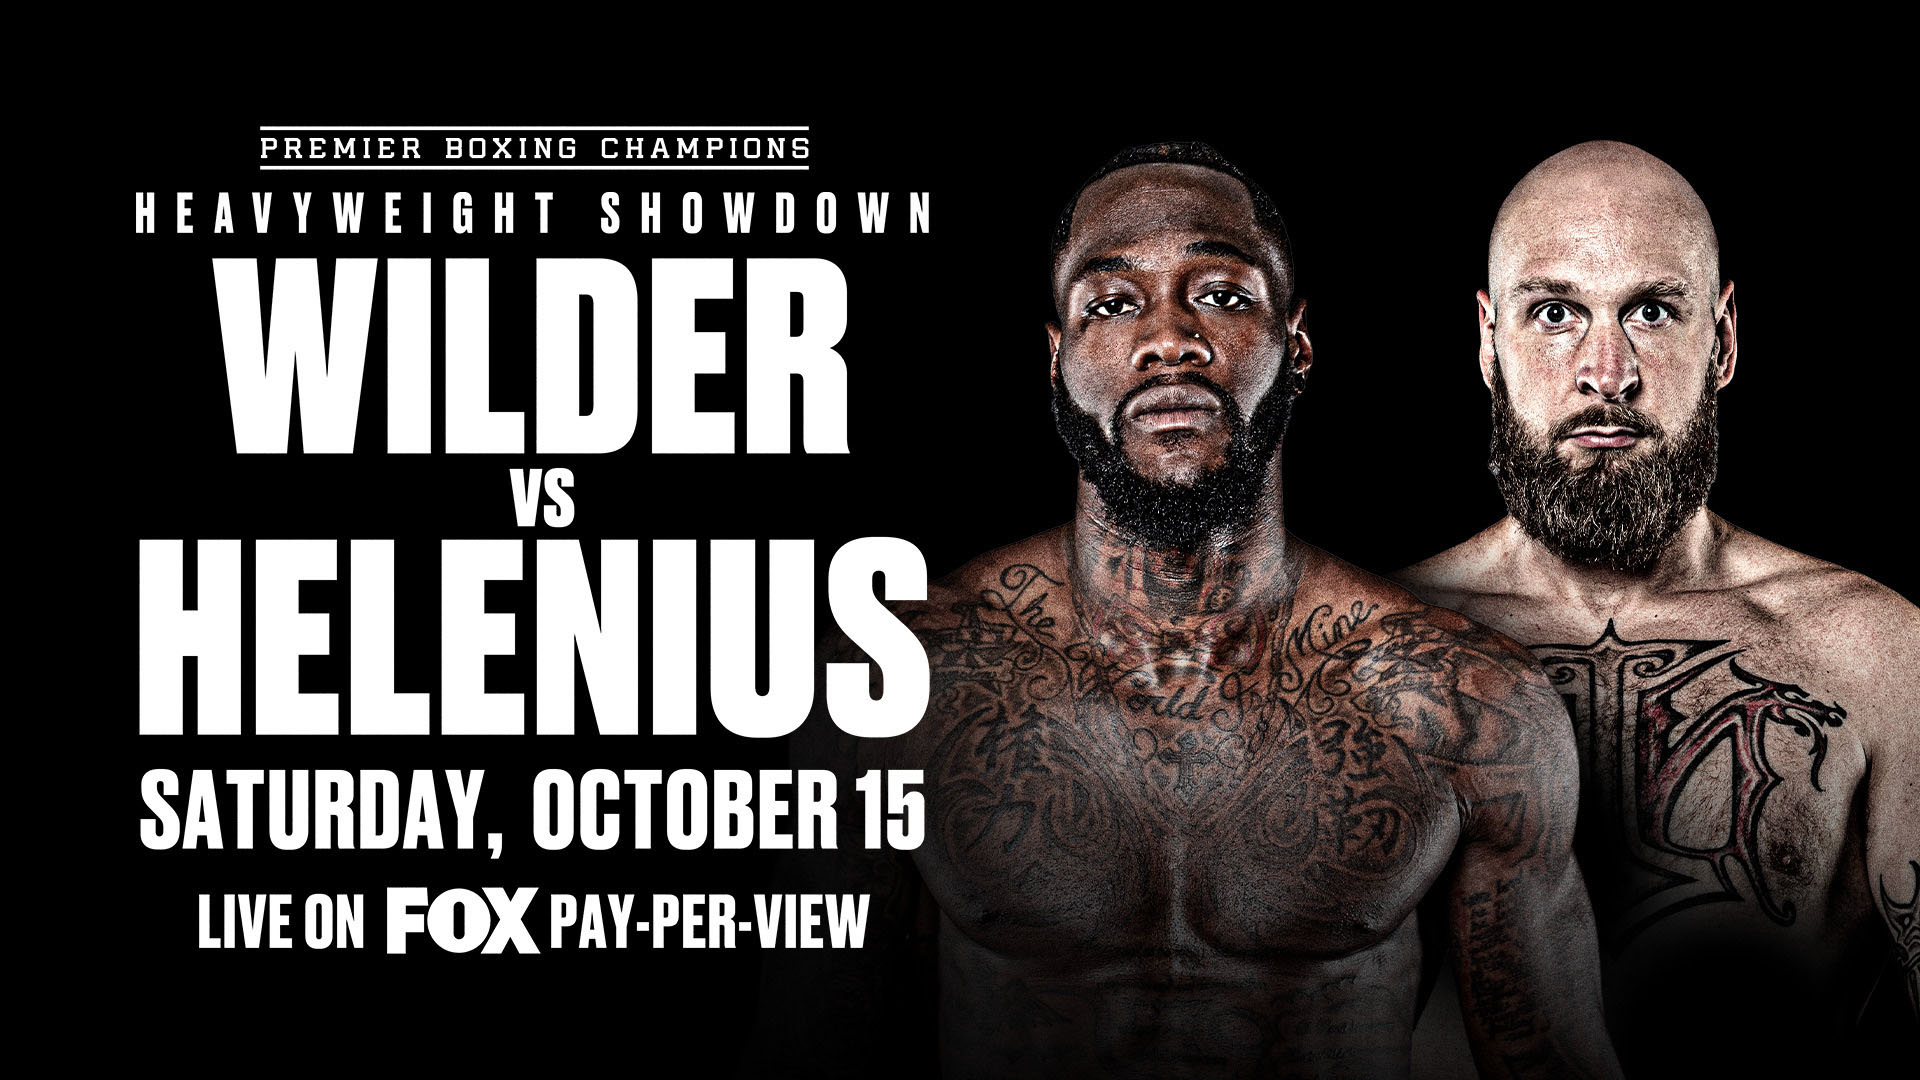 deontay wilder fight live